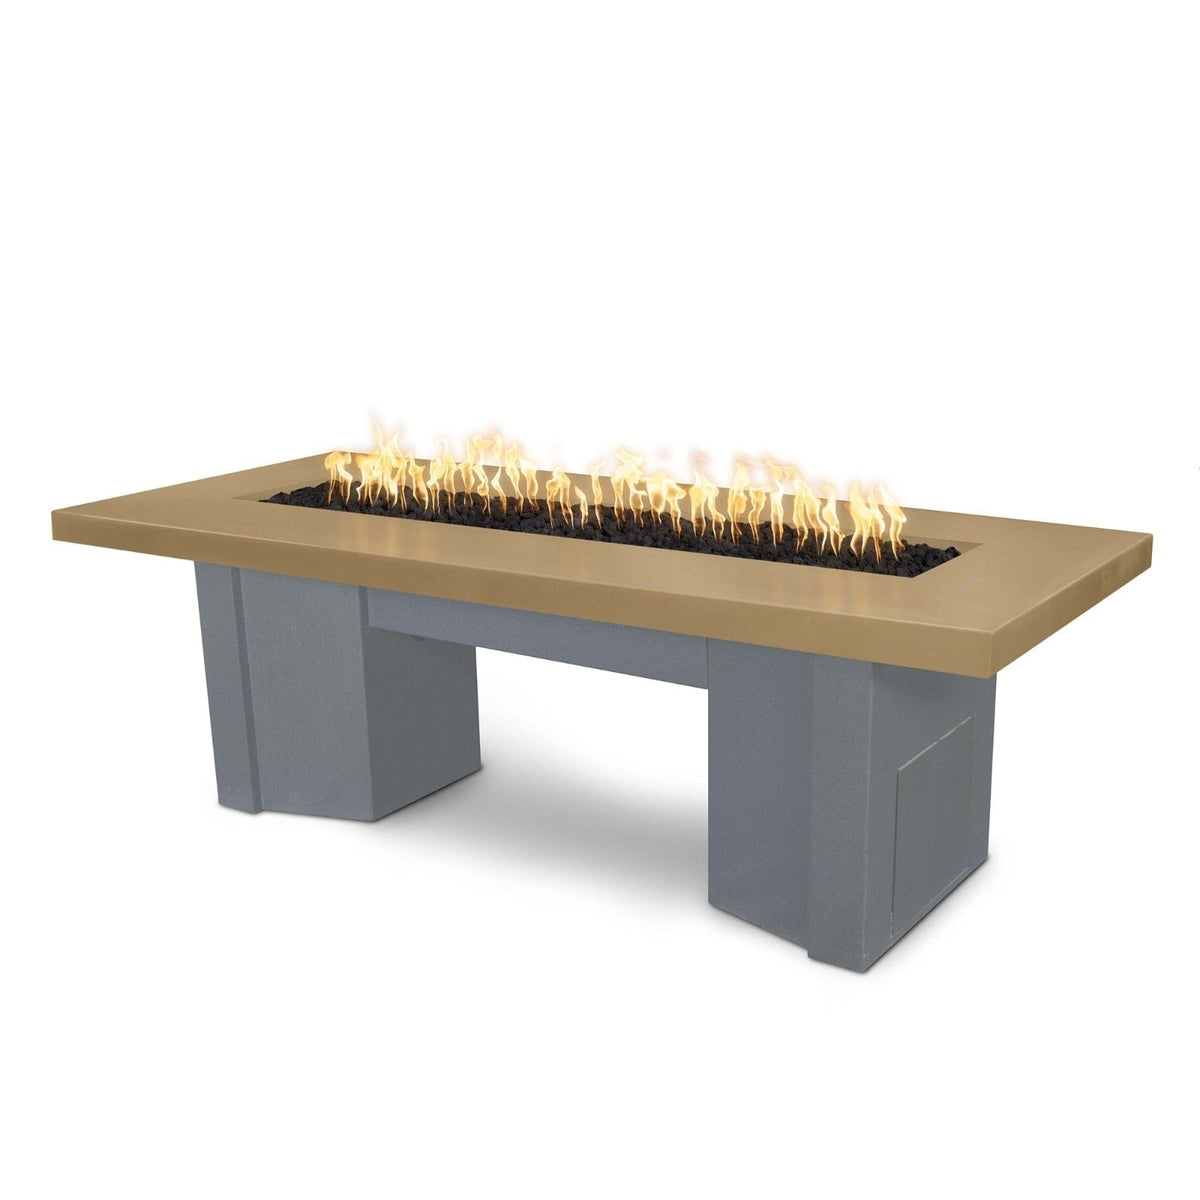 The Outdoor Plus Fire Features Brown (-BRN) / Gray Powder Coated Steel (-GRY) The Outdoor Plus 60&quot; Alameda Fire Table Smooth Concrete in Liquid Propane - Flame Sense System with Push Button Spark Igniter / OPT-ALMGFRC60FSEN-LP